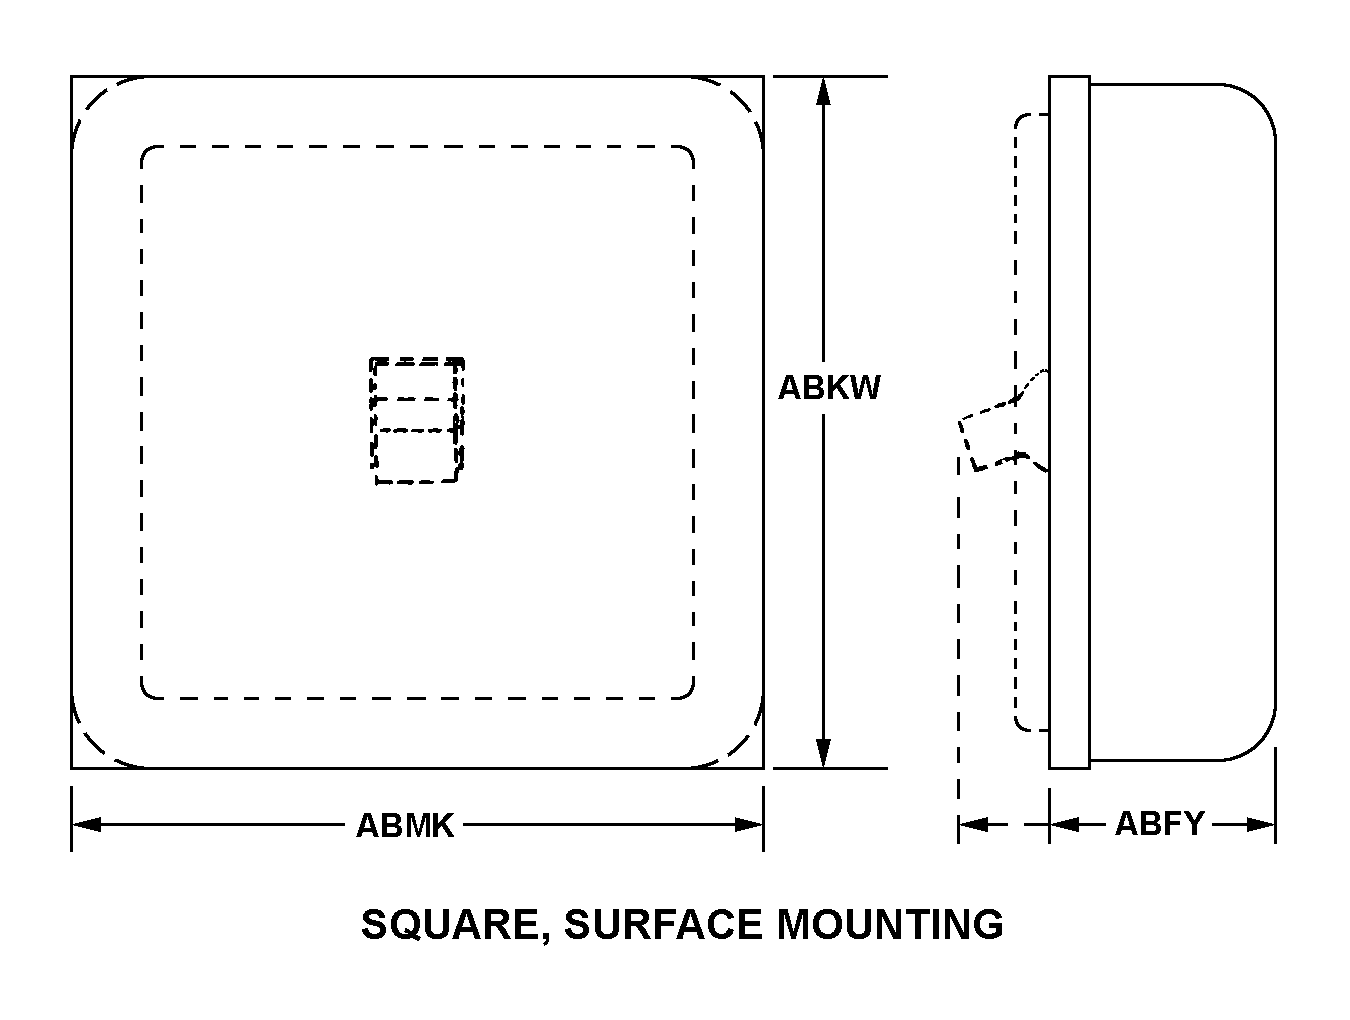 SQUARE, SURFACE MOUNTING style nsn 5940-01-526-6349